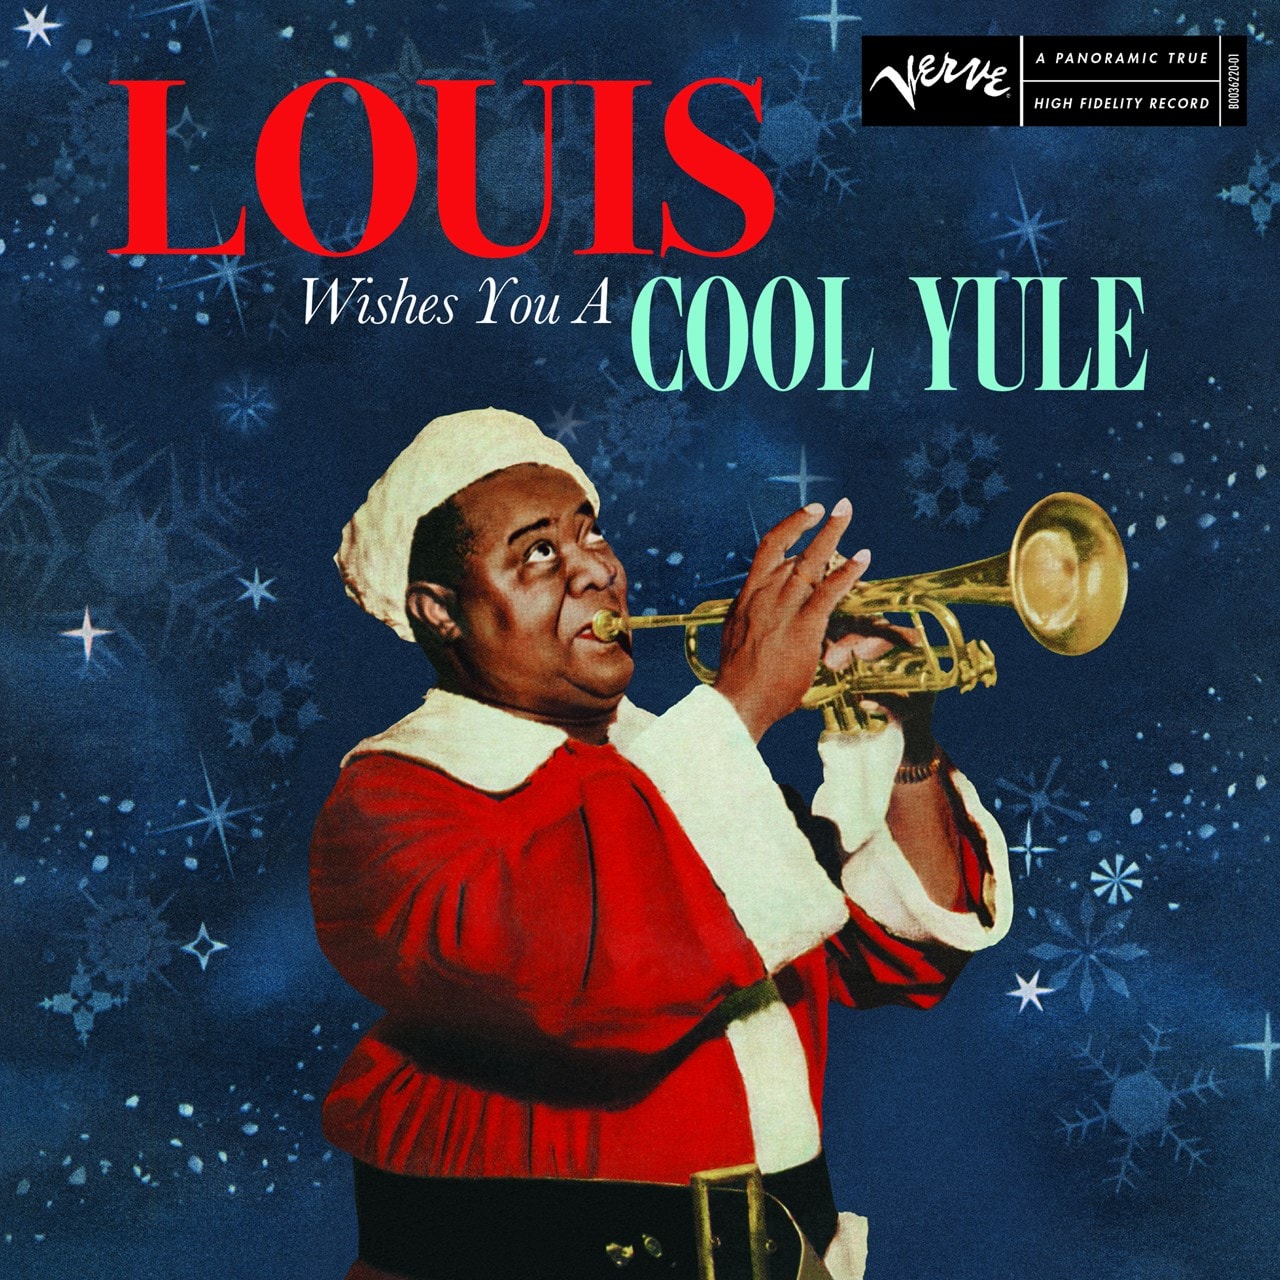 Louis Wishes You a Cool Yule Vinyl 12" Album Free shipping over £20